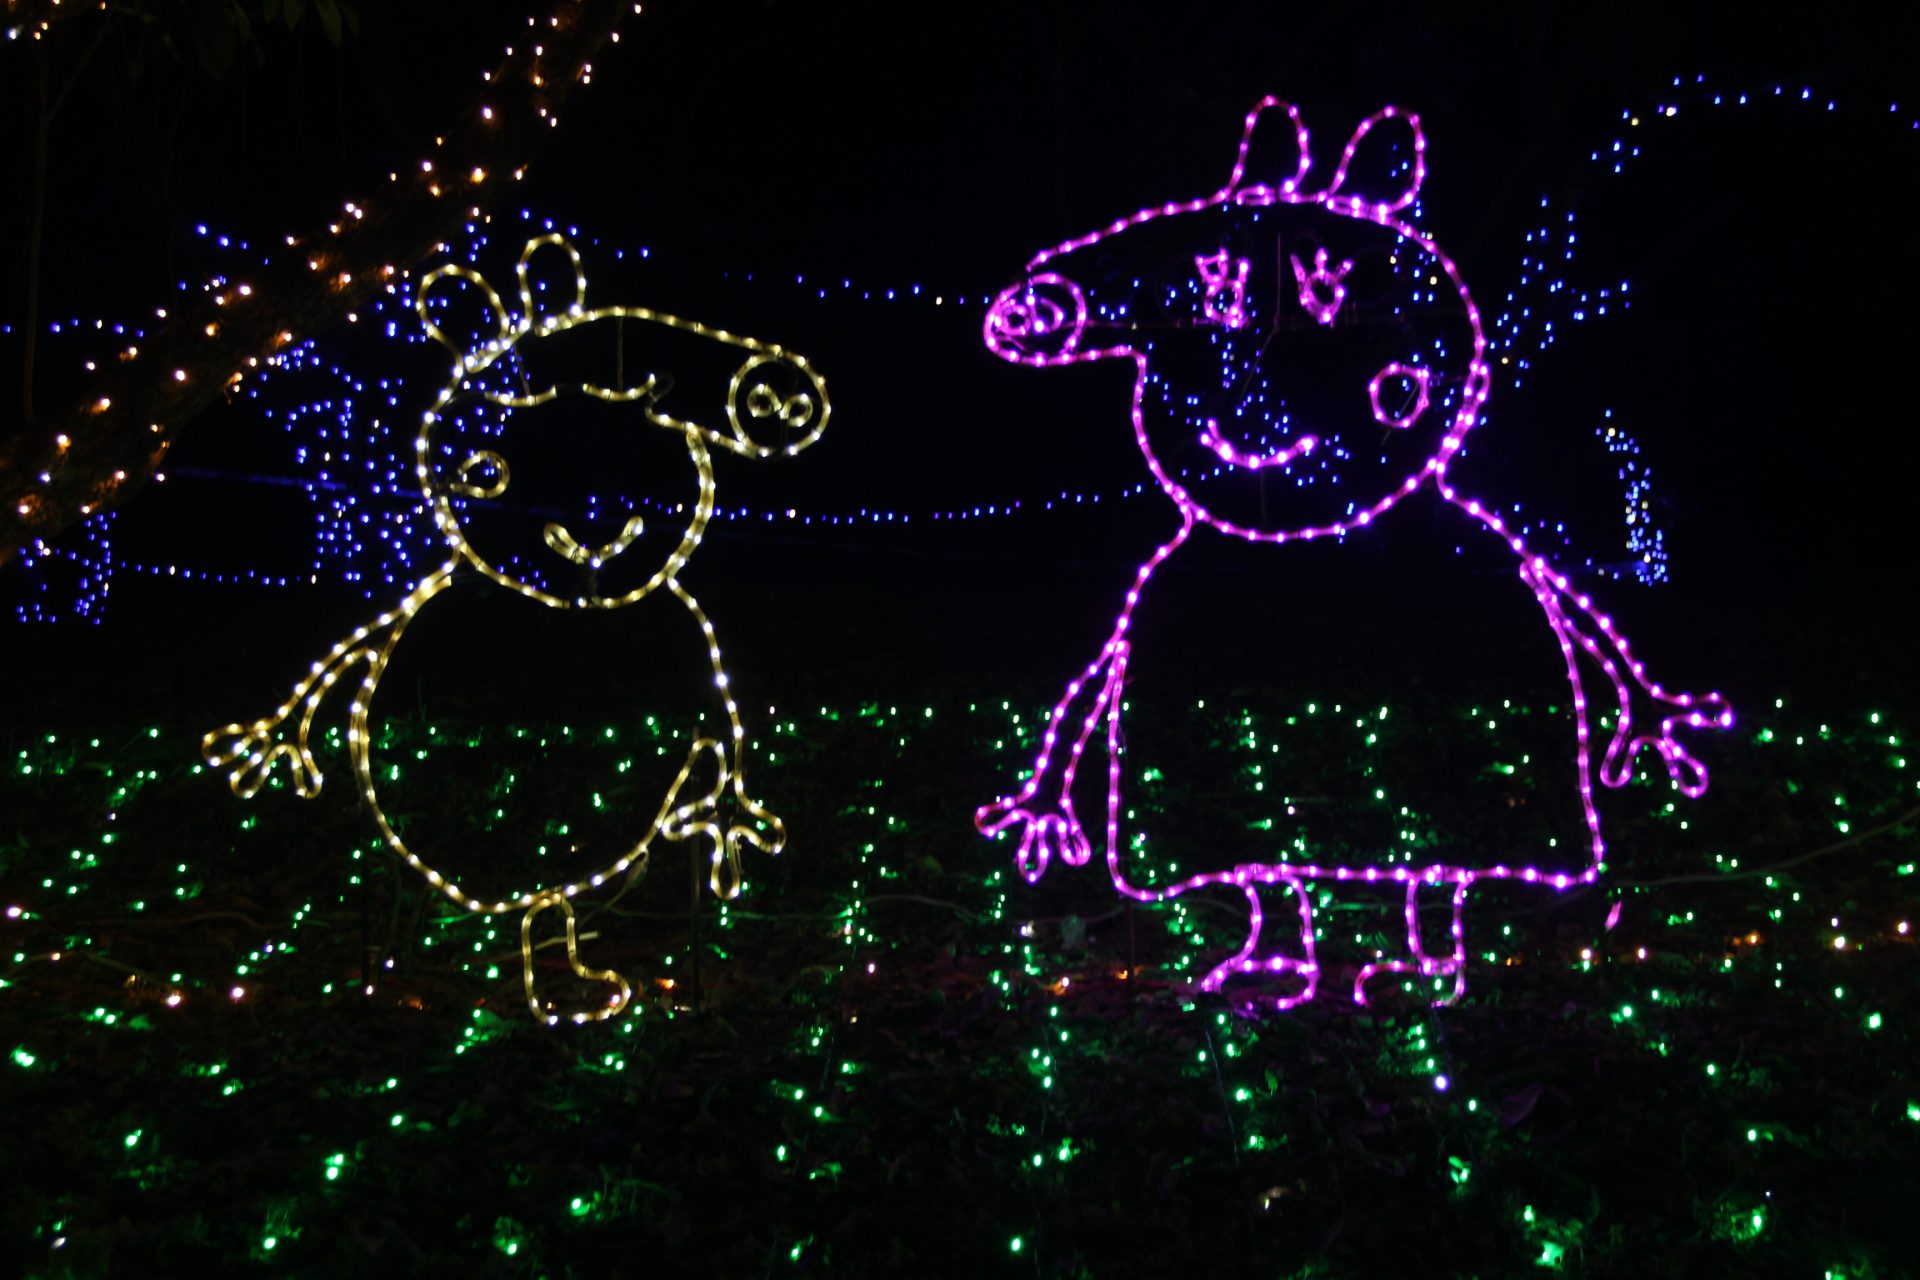 Peppa Pig-shaped lanterns during a light show in Guangdong
Province, China. Photo: VCG via Getty Images.